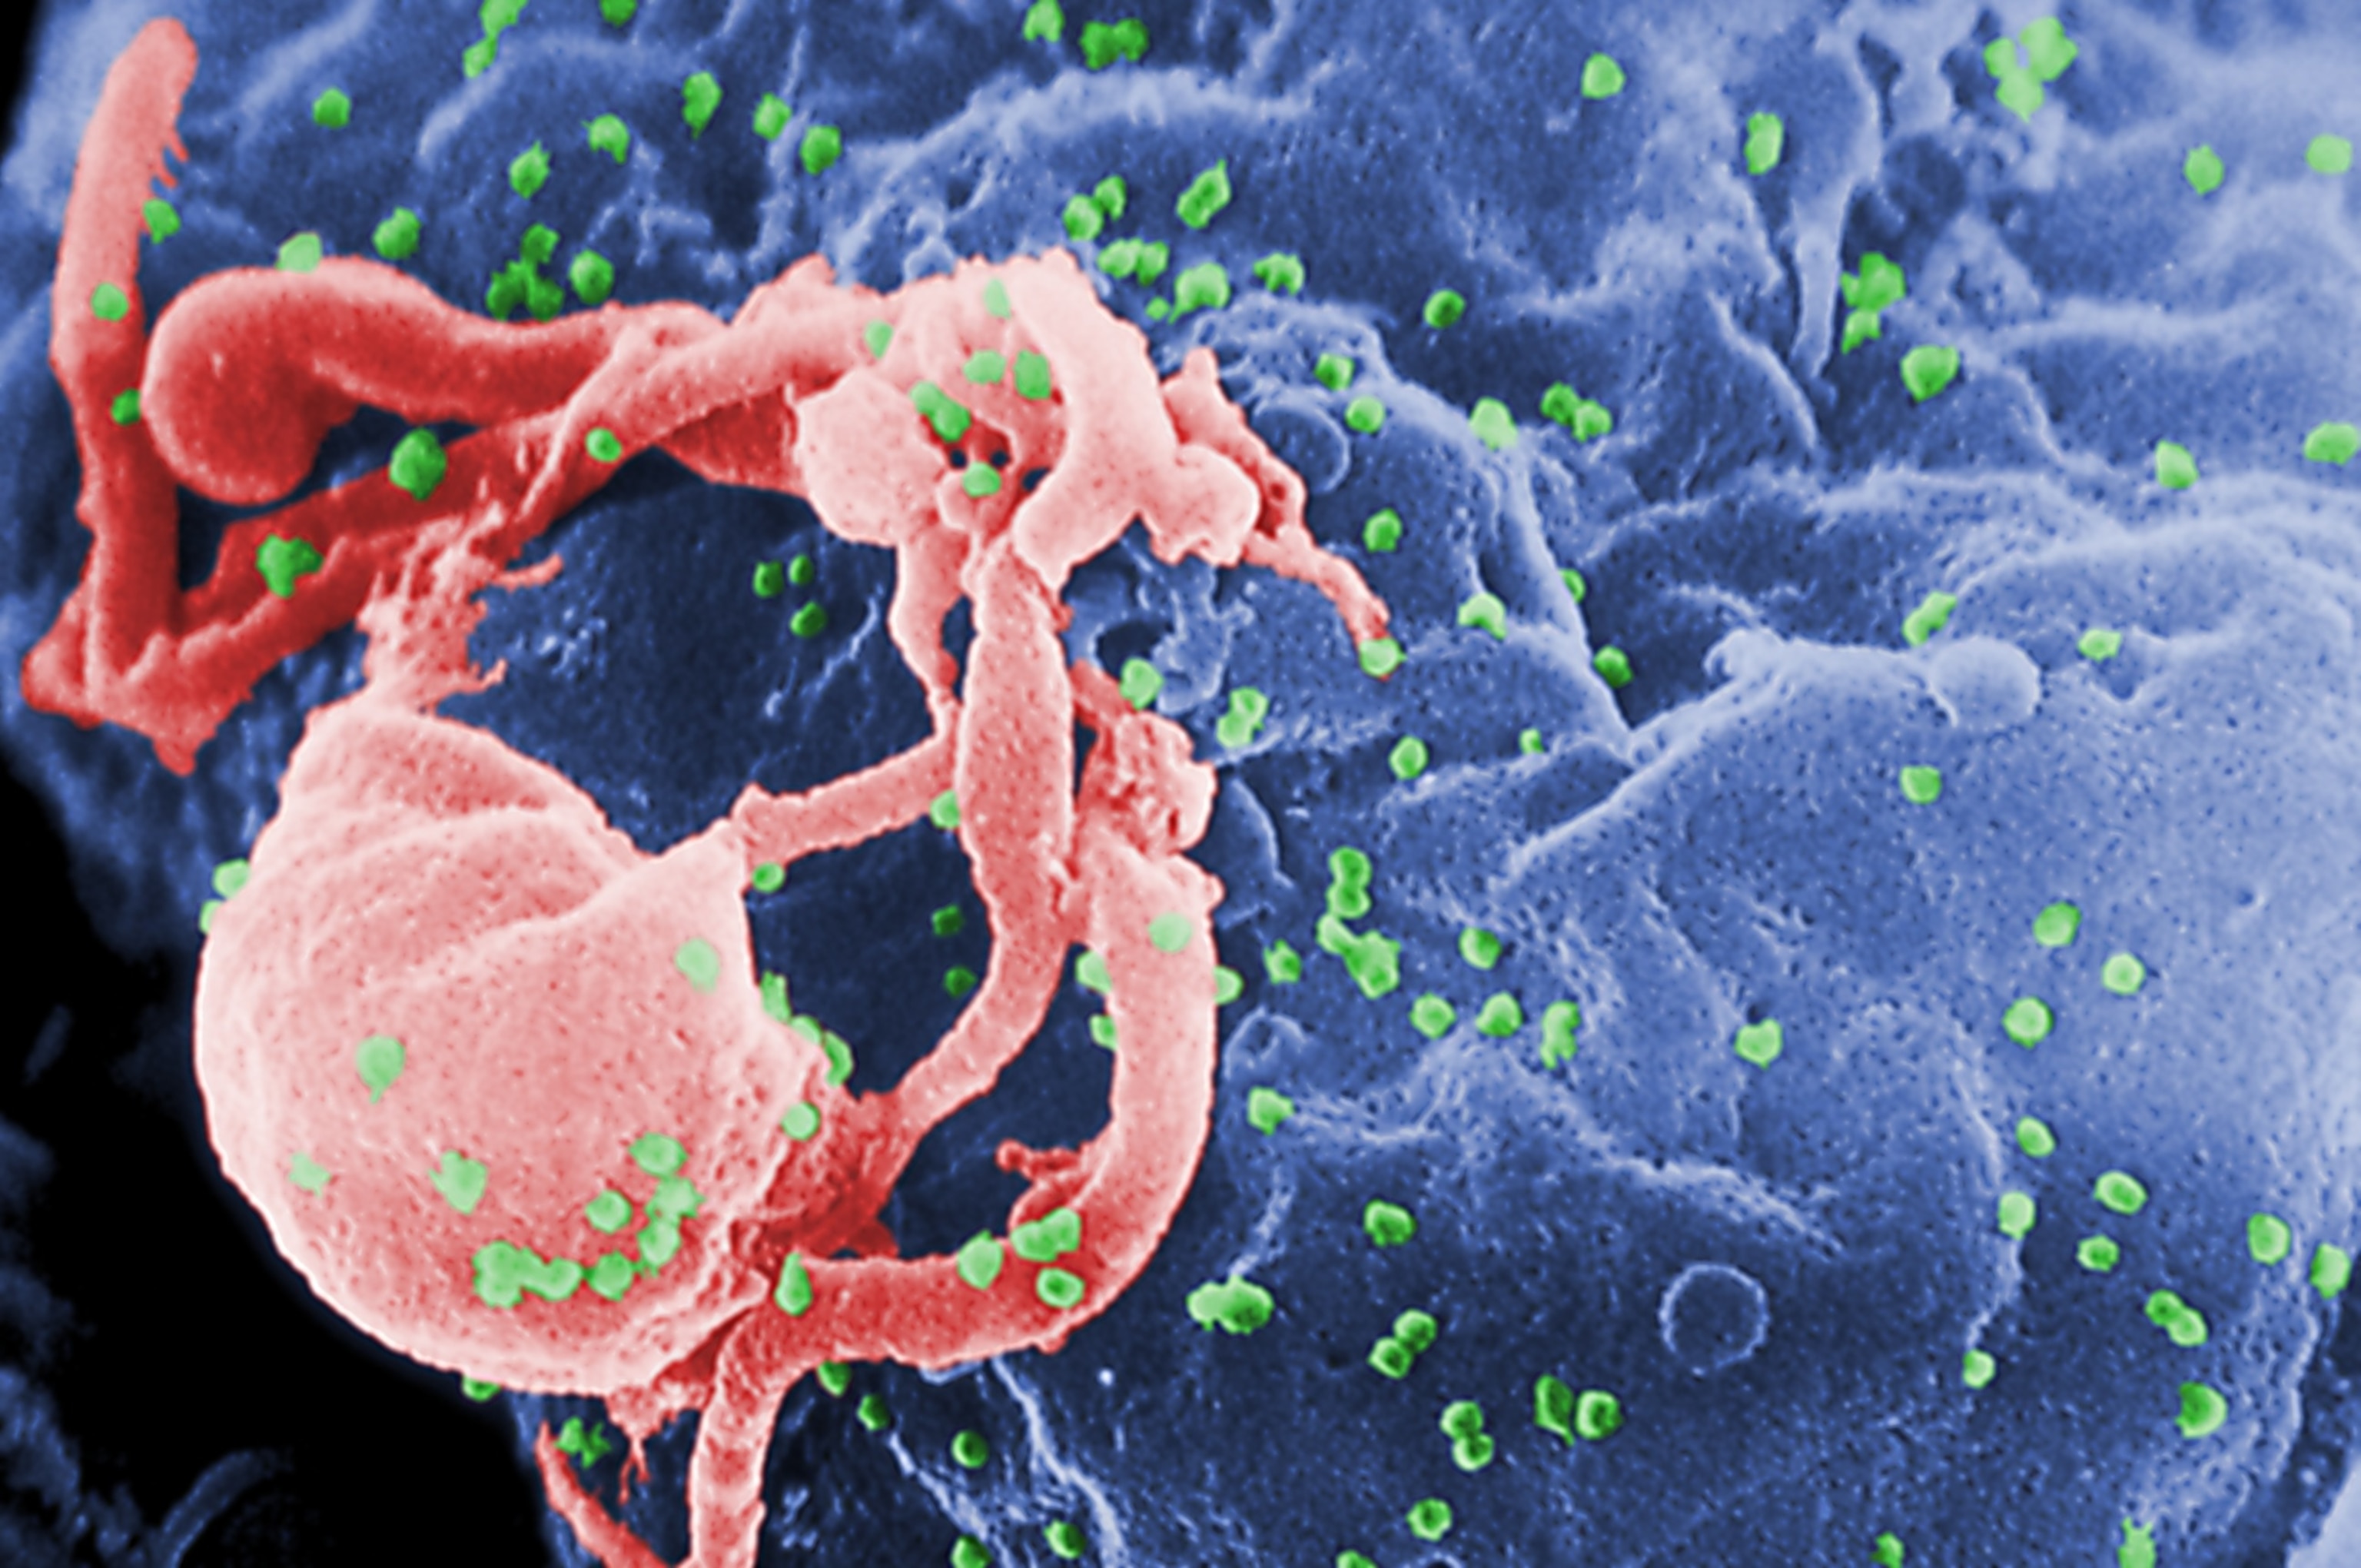 PHOTO: In this 1985 file photo, a scanning electron micrograph (SEM) shows HIV-1 virions as green round bumps budding from the surface of a cultured lymphocyte cell.